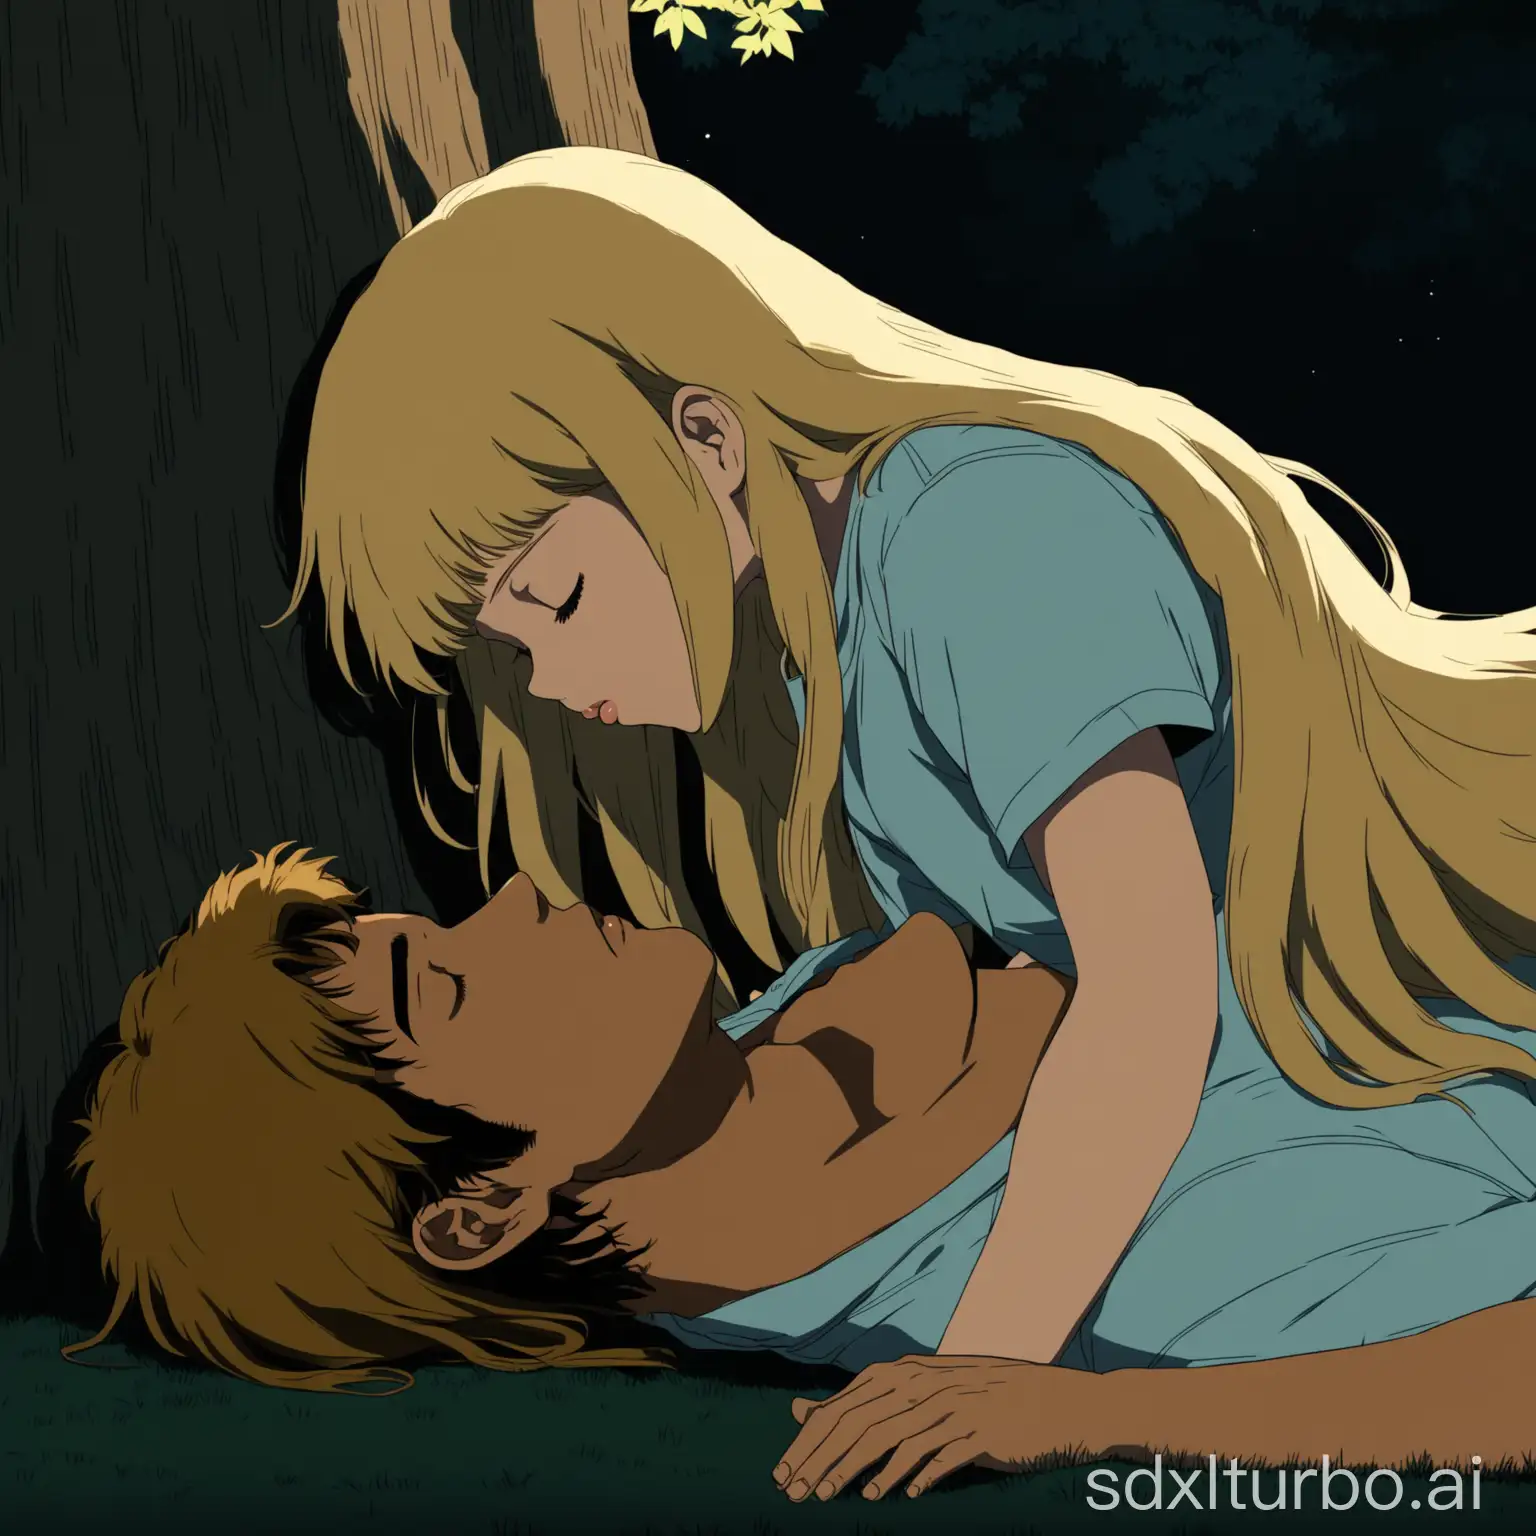 a tall chubby handsome tanned and young man, brown mullet hair kissing the lips of a low stature blonde teen girl with frizzy long hair and bangs, both closing eyes, lying near a tree, in a dark park, full view, anime style